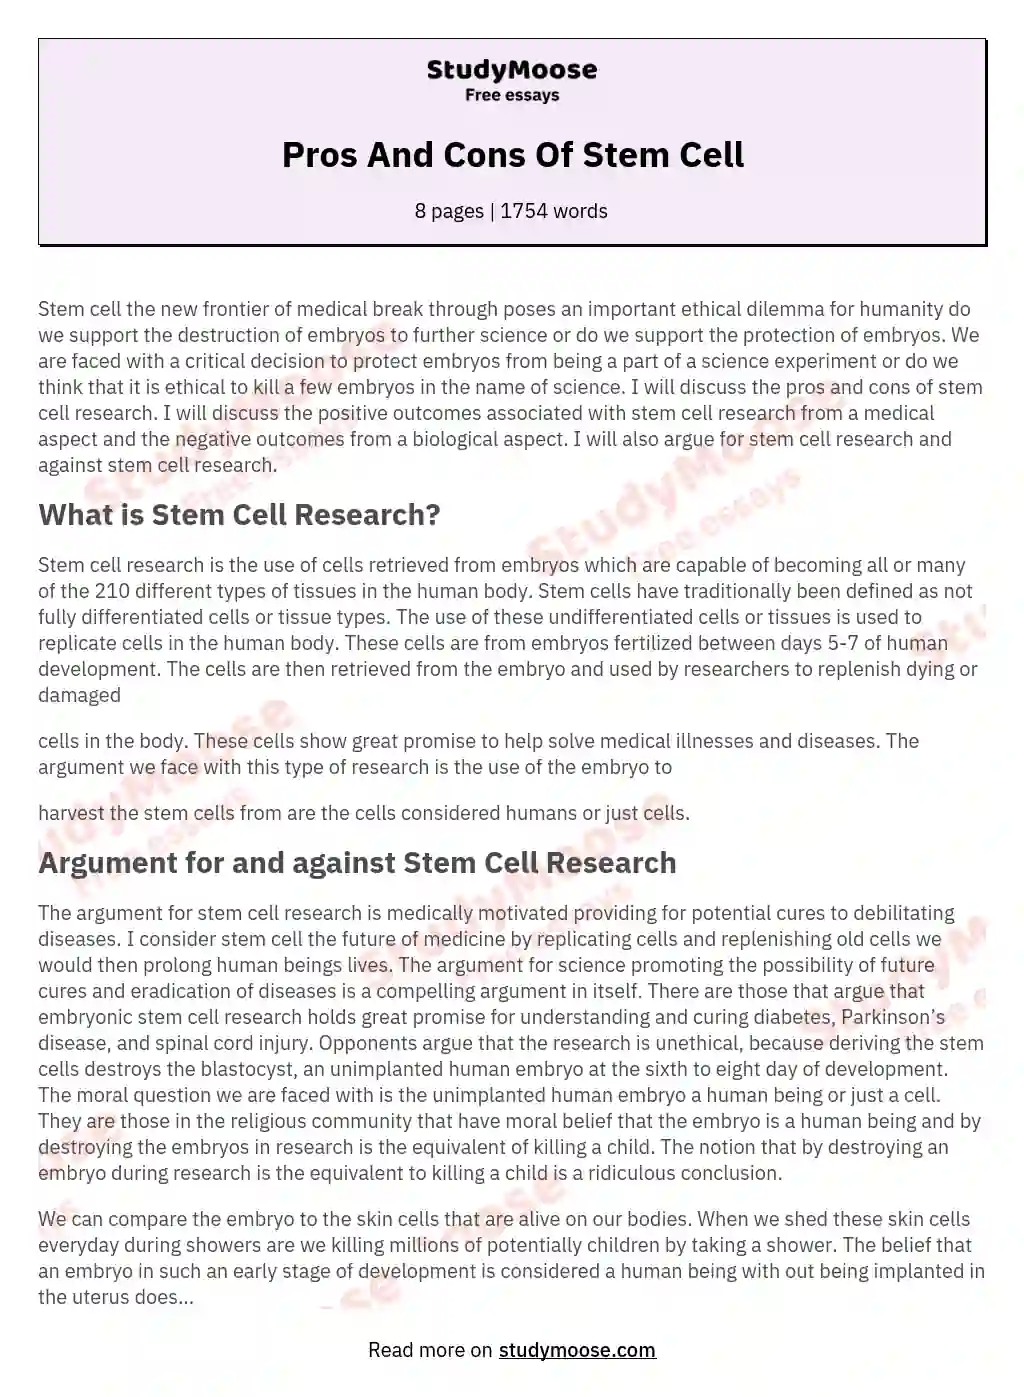 Pros And Cons Of Stem Cell essay